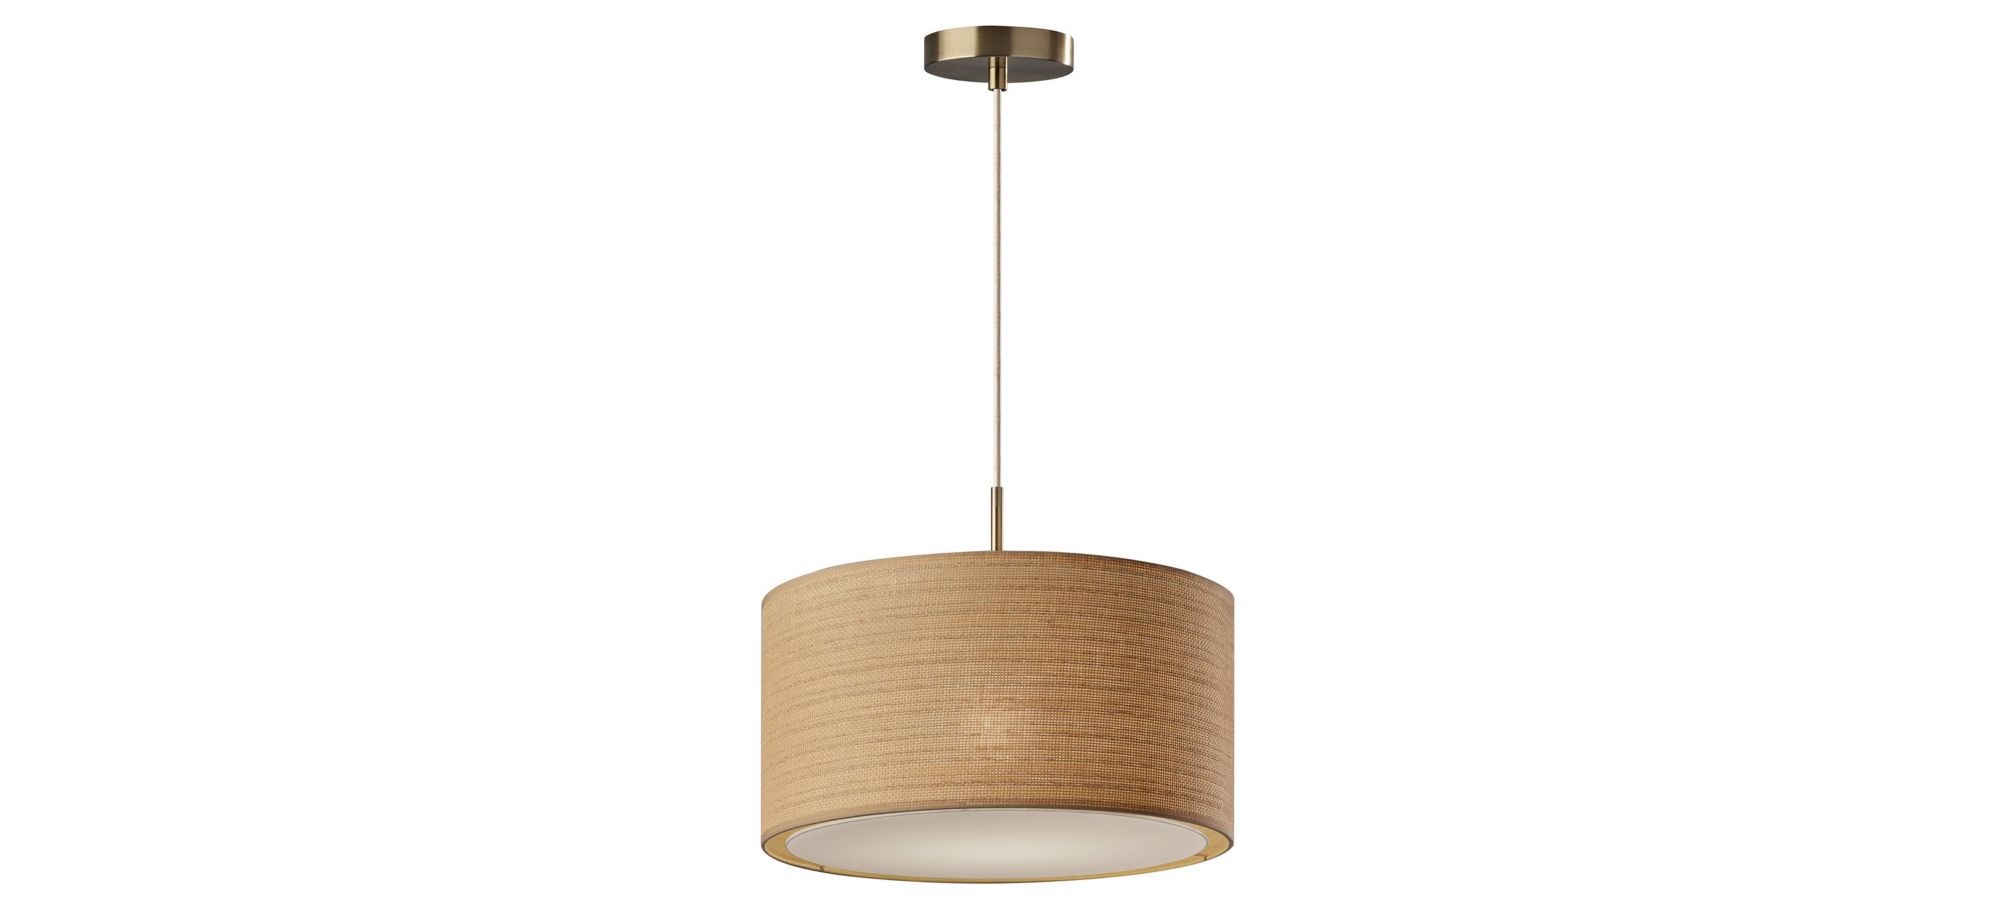 Harvest Large Pendant Light in Antique Brass by Adesso Inc